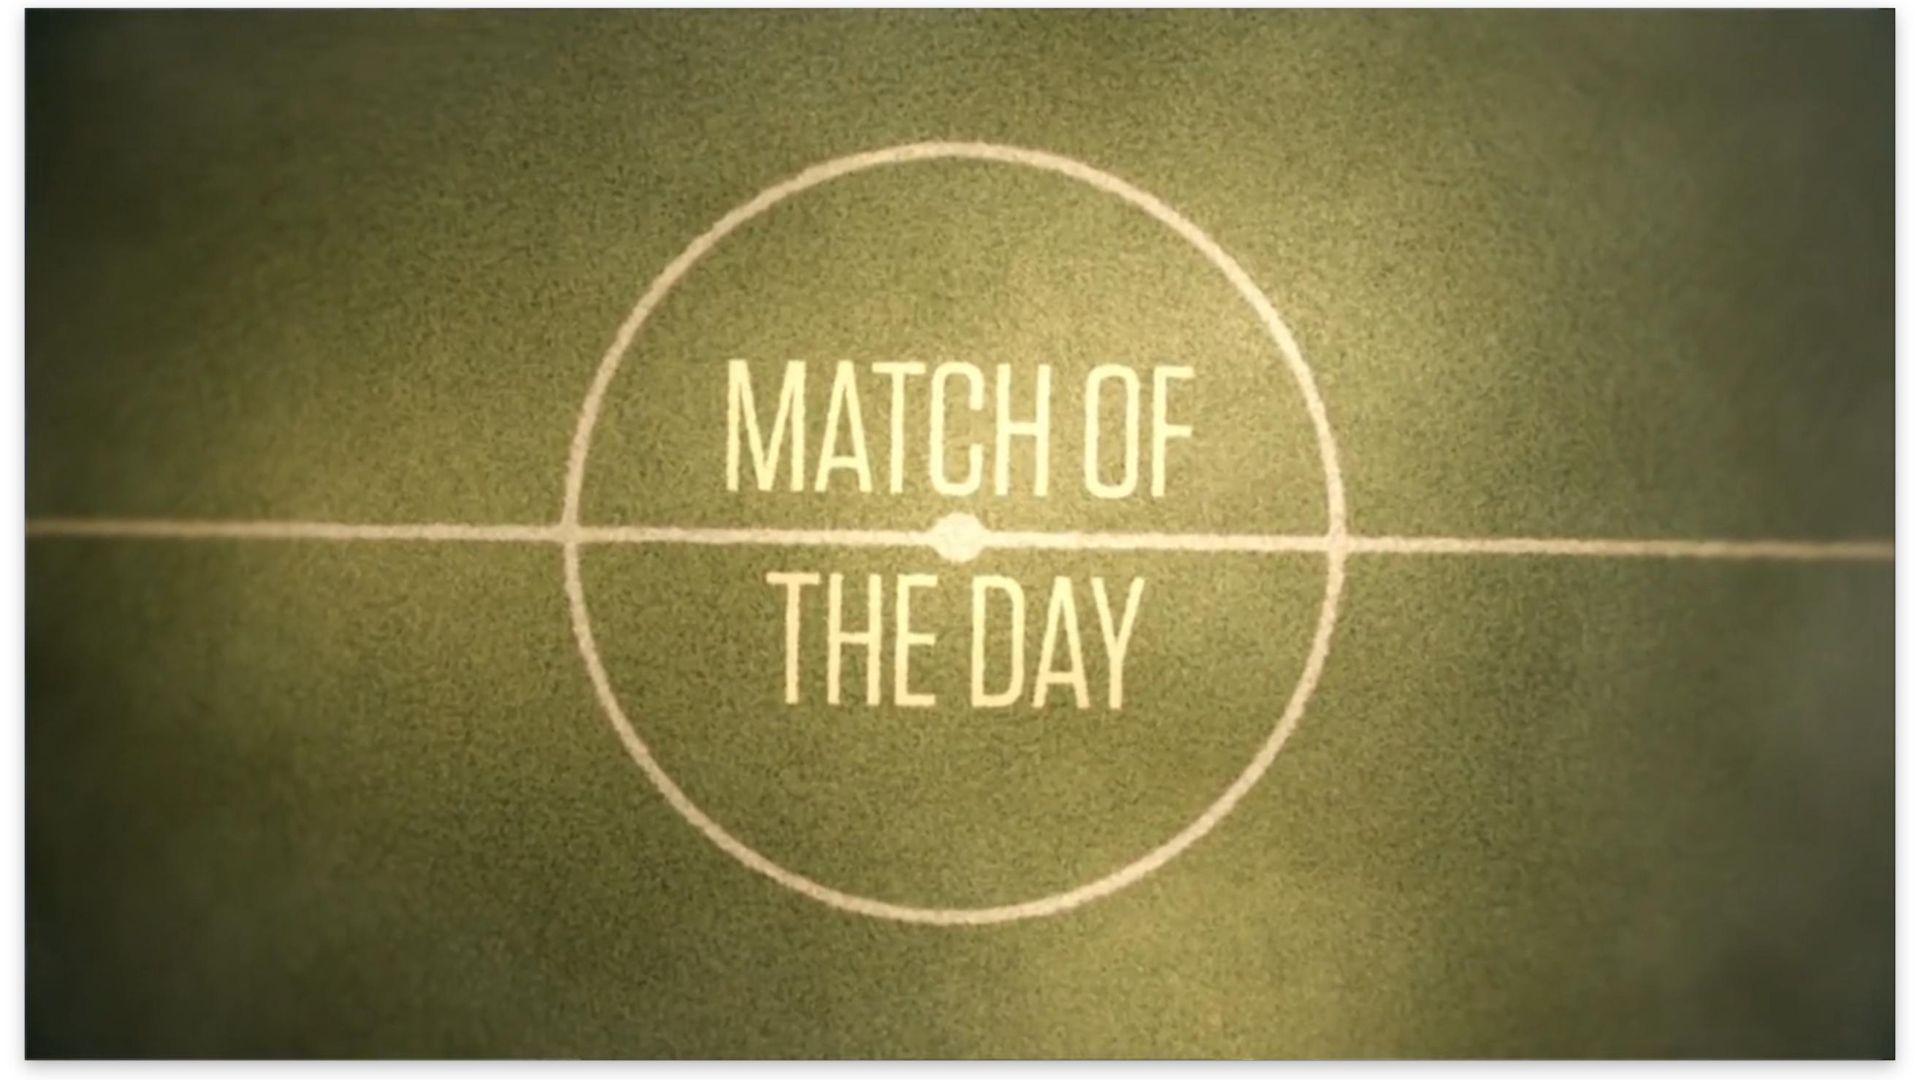 Match of the Day background